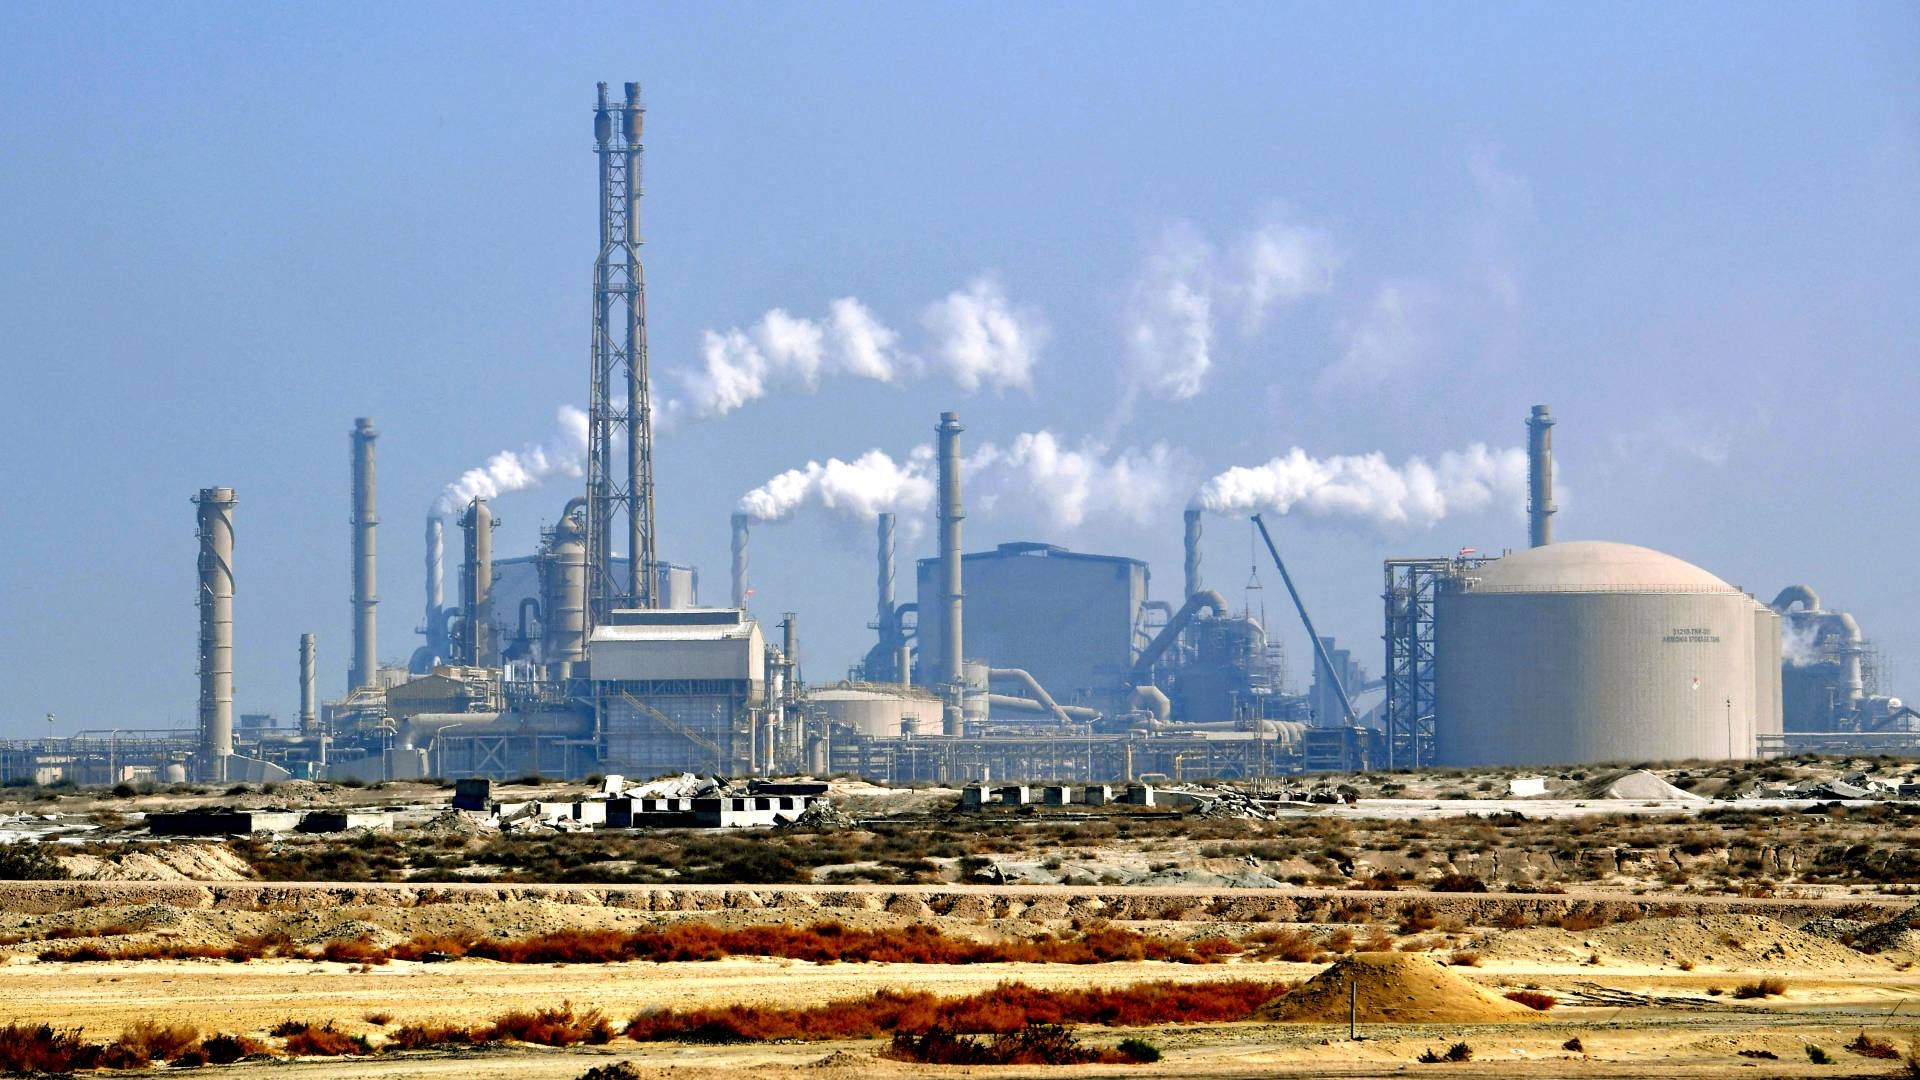 A view of an industrial plant at the Jubail Industrial City, about 95 kilometres north of Dammam in Saudi Arabia's eastern province overlooking the Gulf.